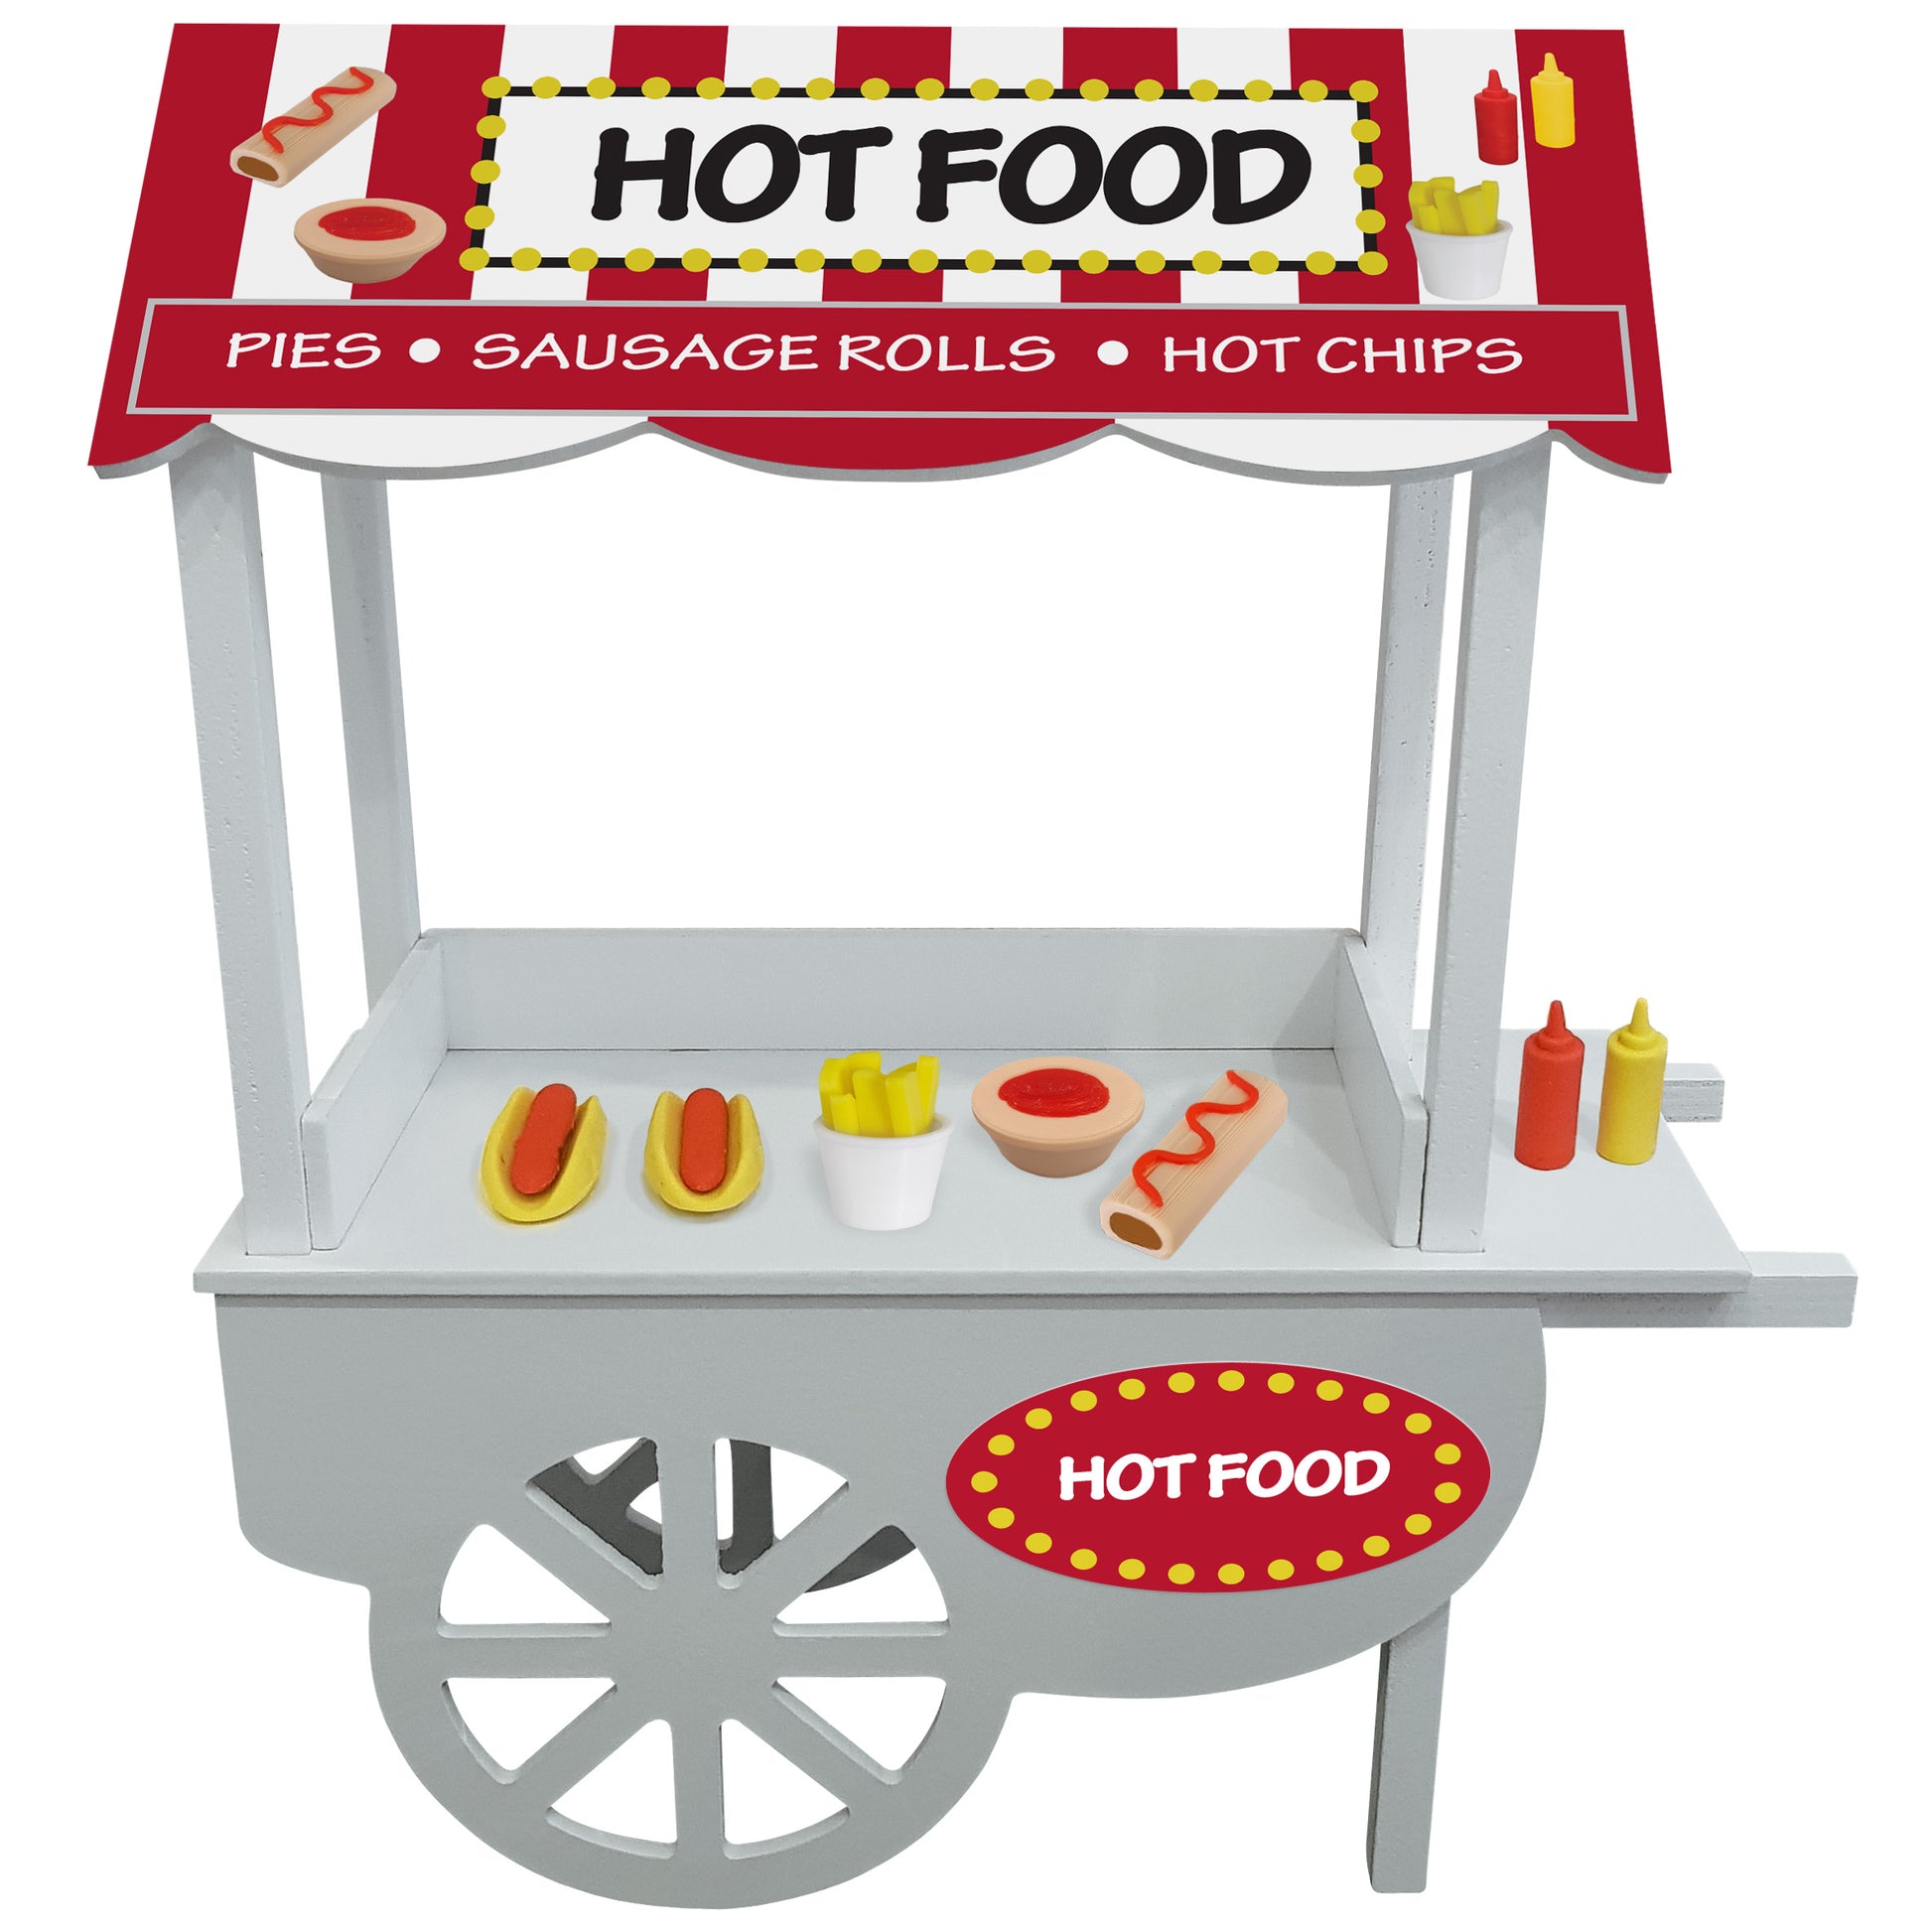 Miniature hot food stand with pies, sausage rolls, hot dogs and sauce